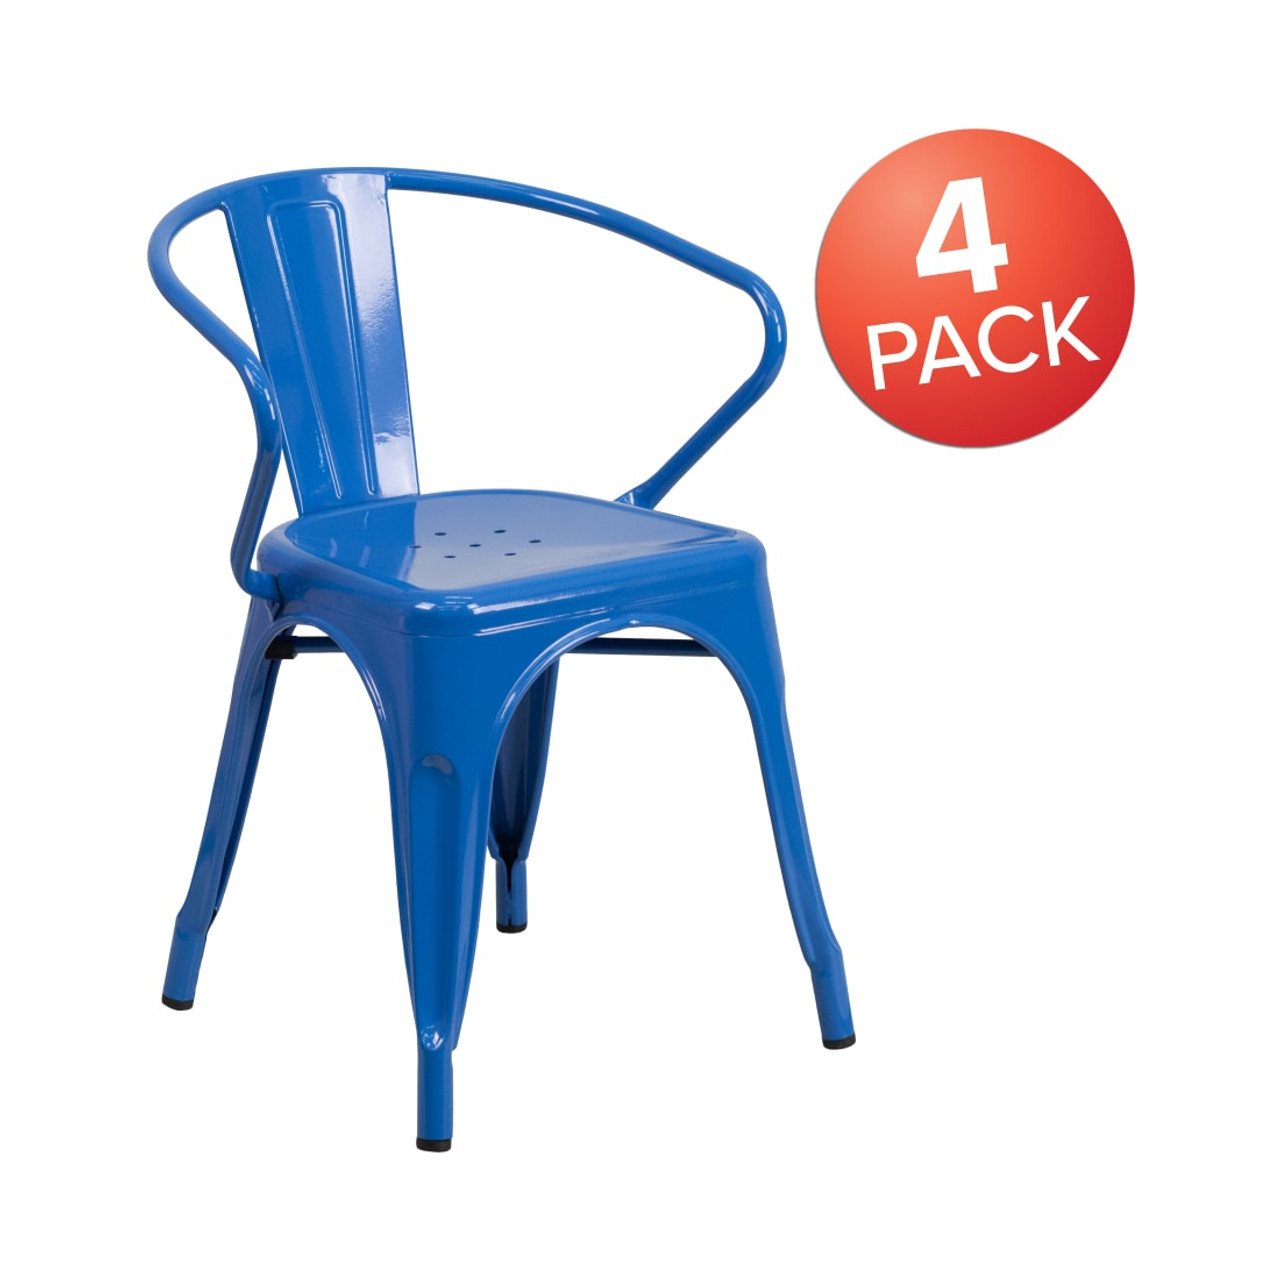 4 Pack Blue Metal Indoor-Outdoor Chair with Arms